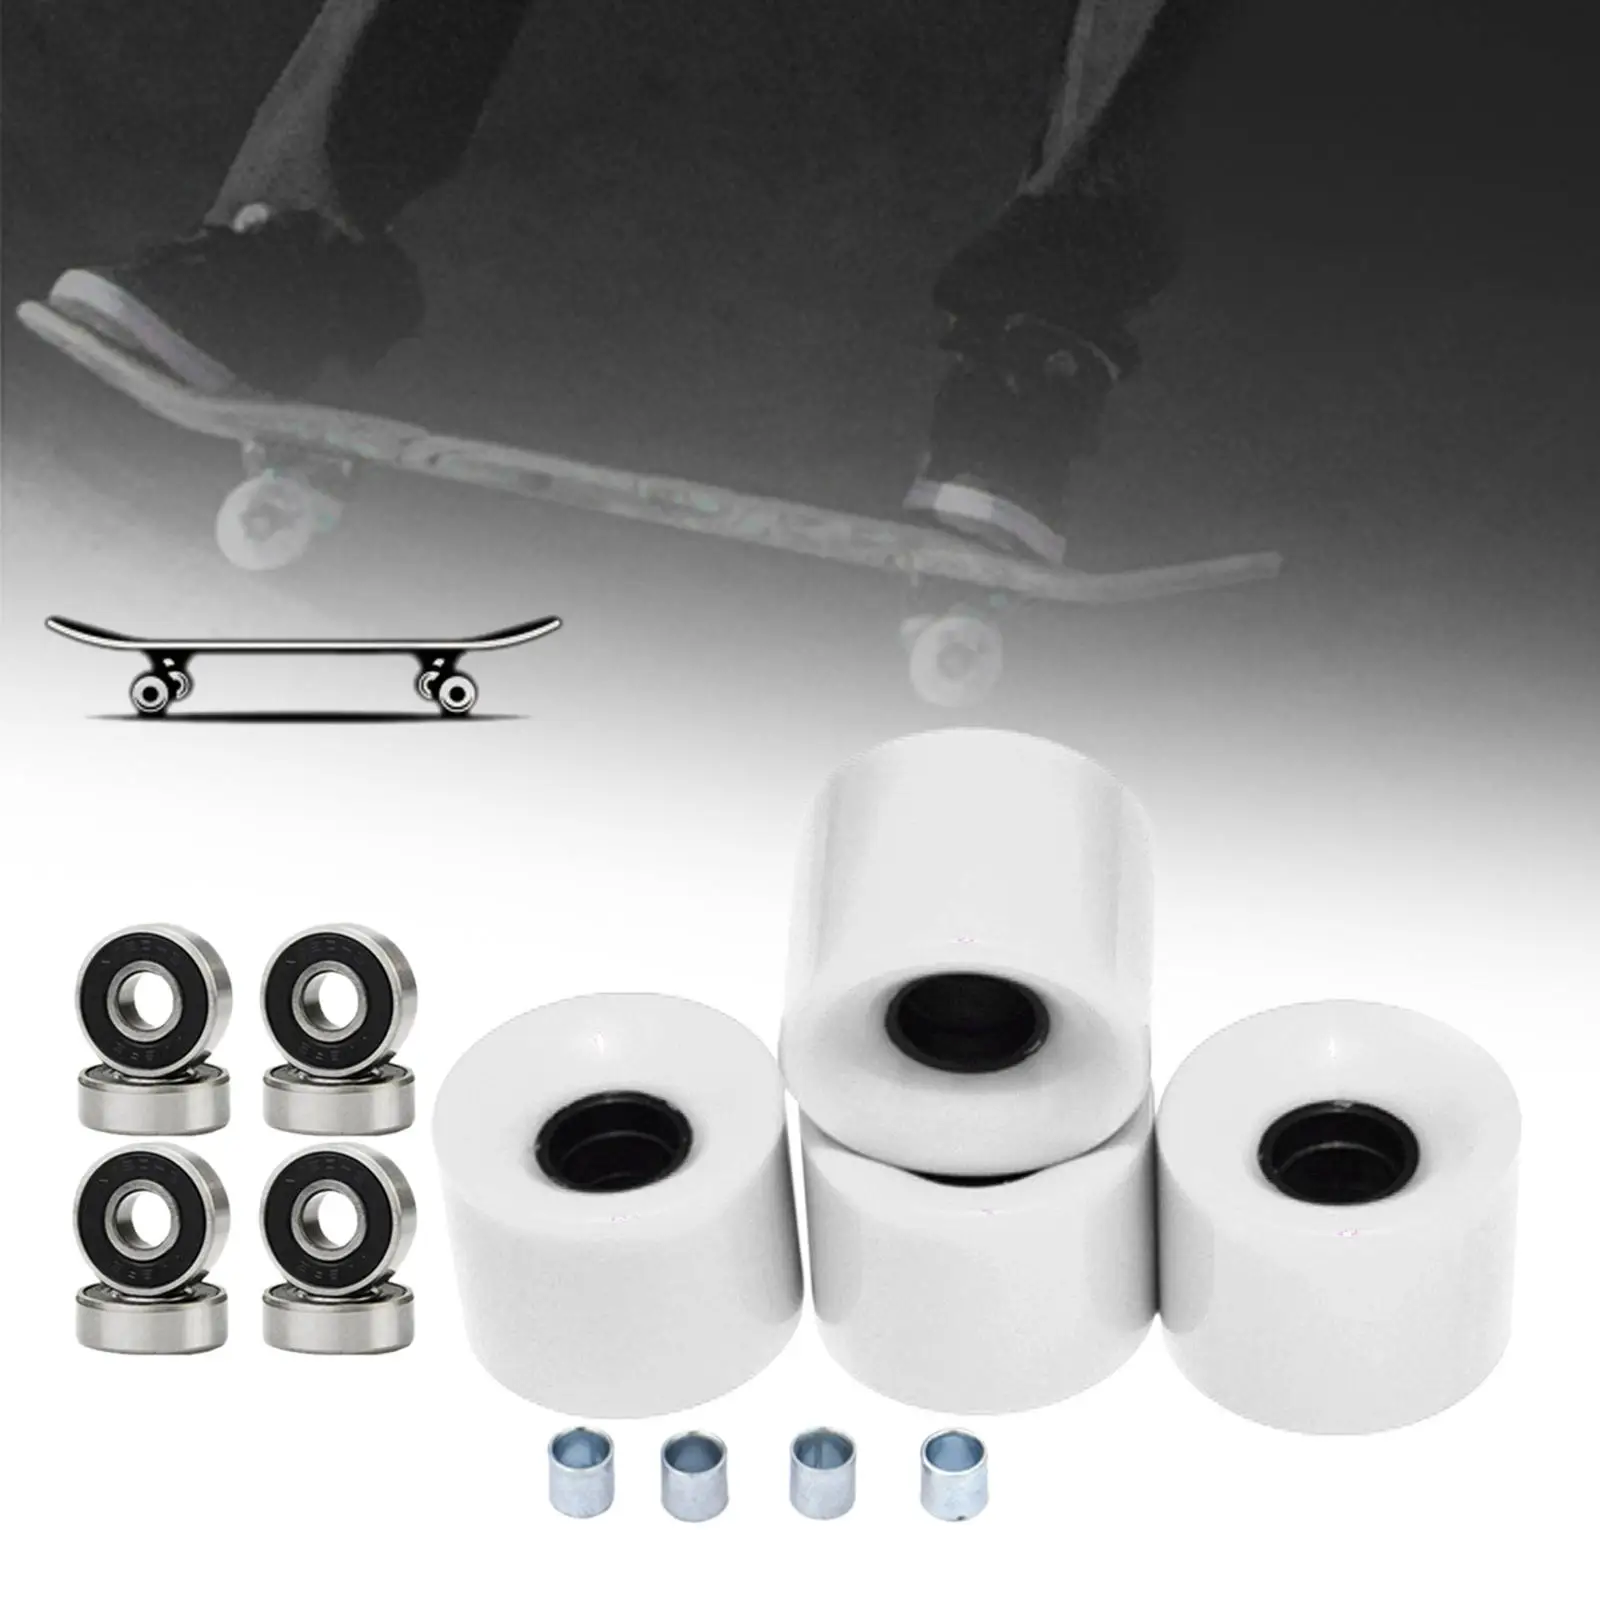 4PCS 60mm 78A PU Skateboard Wheels w/ Bearings and Spacers for Cruising and Street Tricks, Smooth Concrete or Asphalt